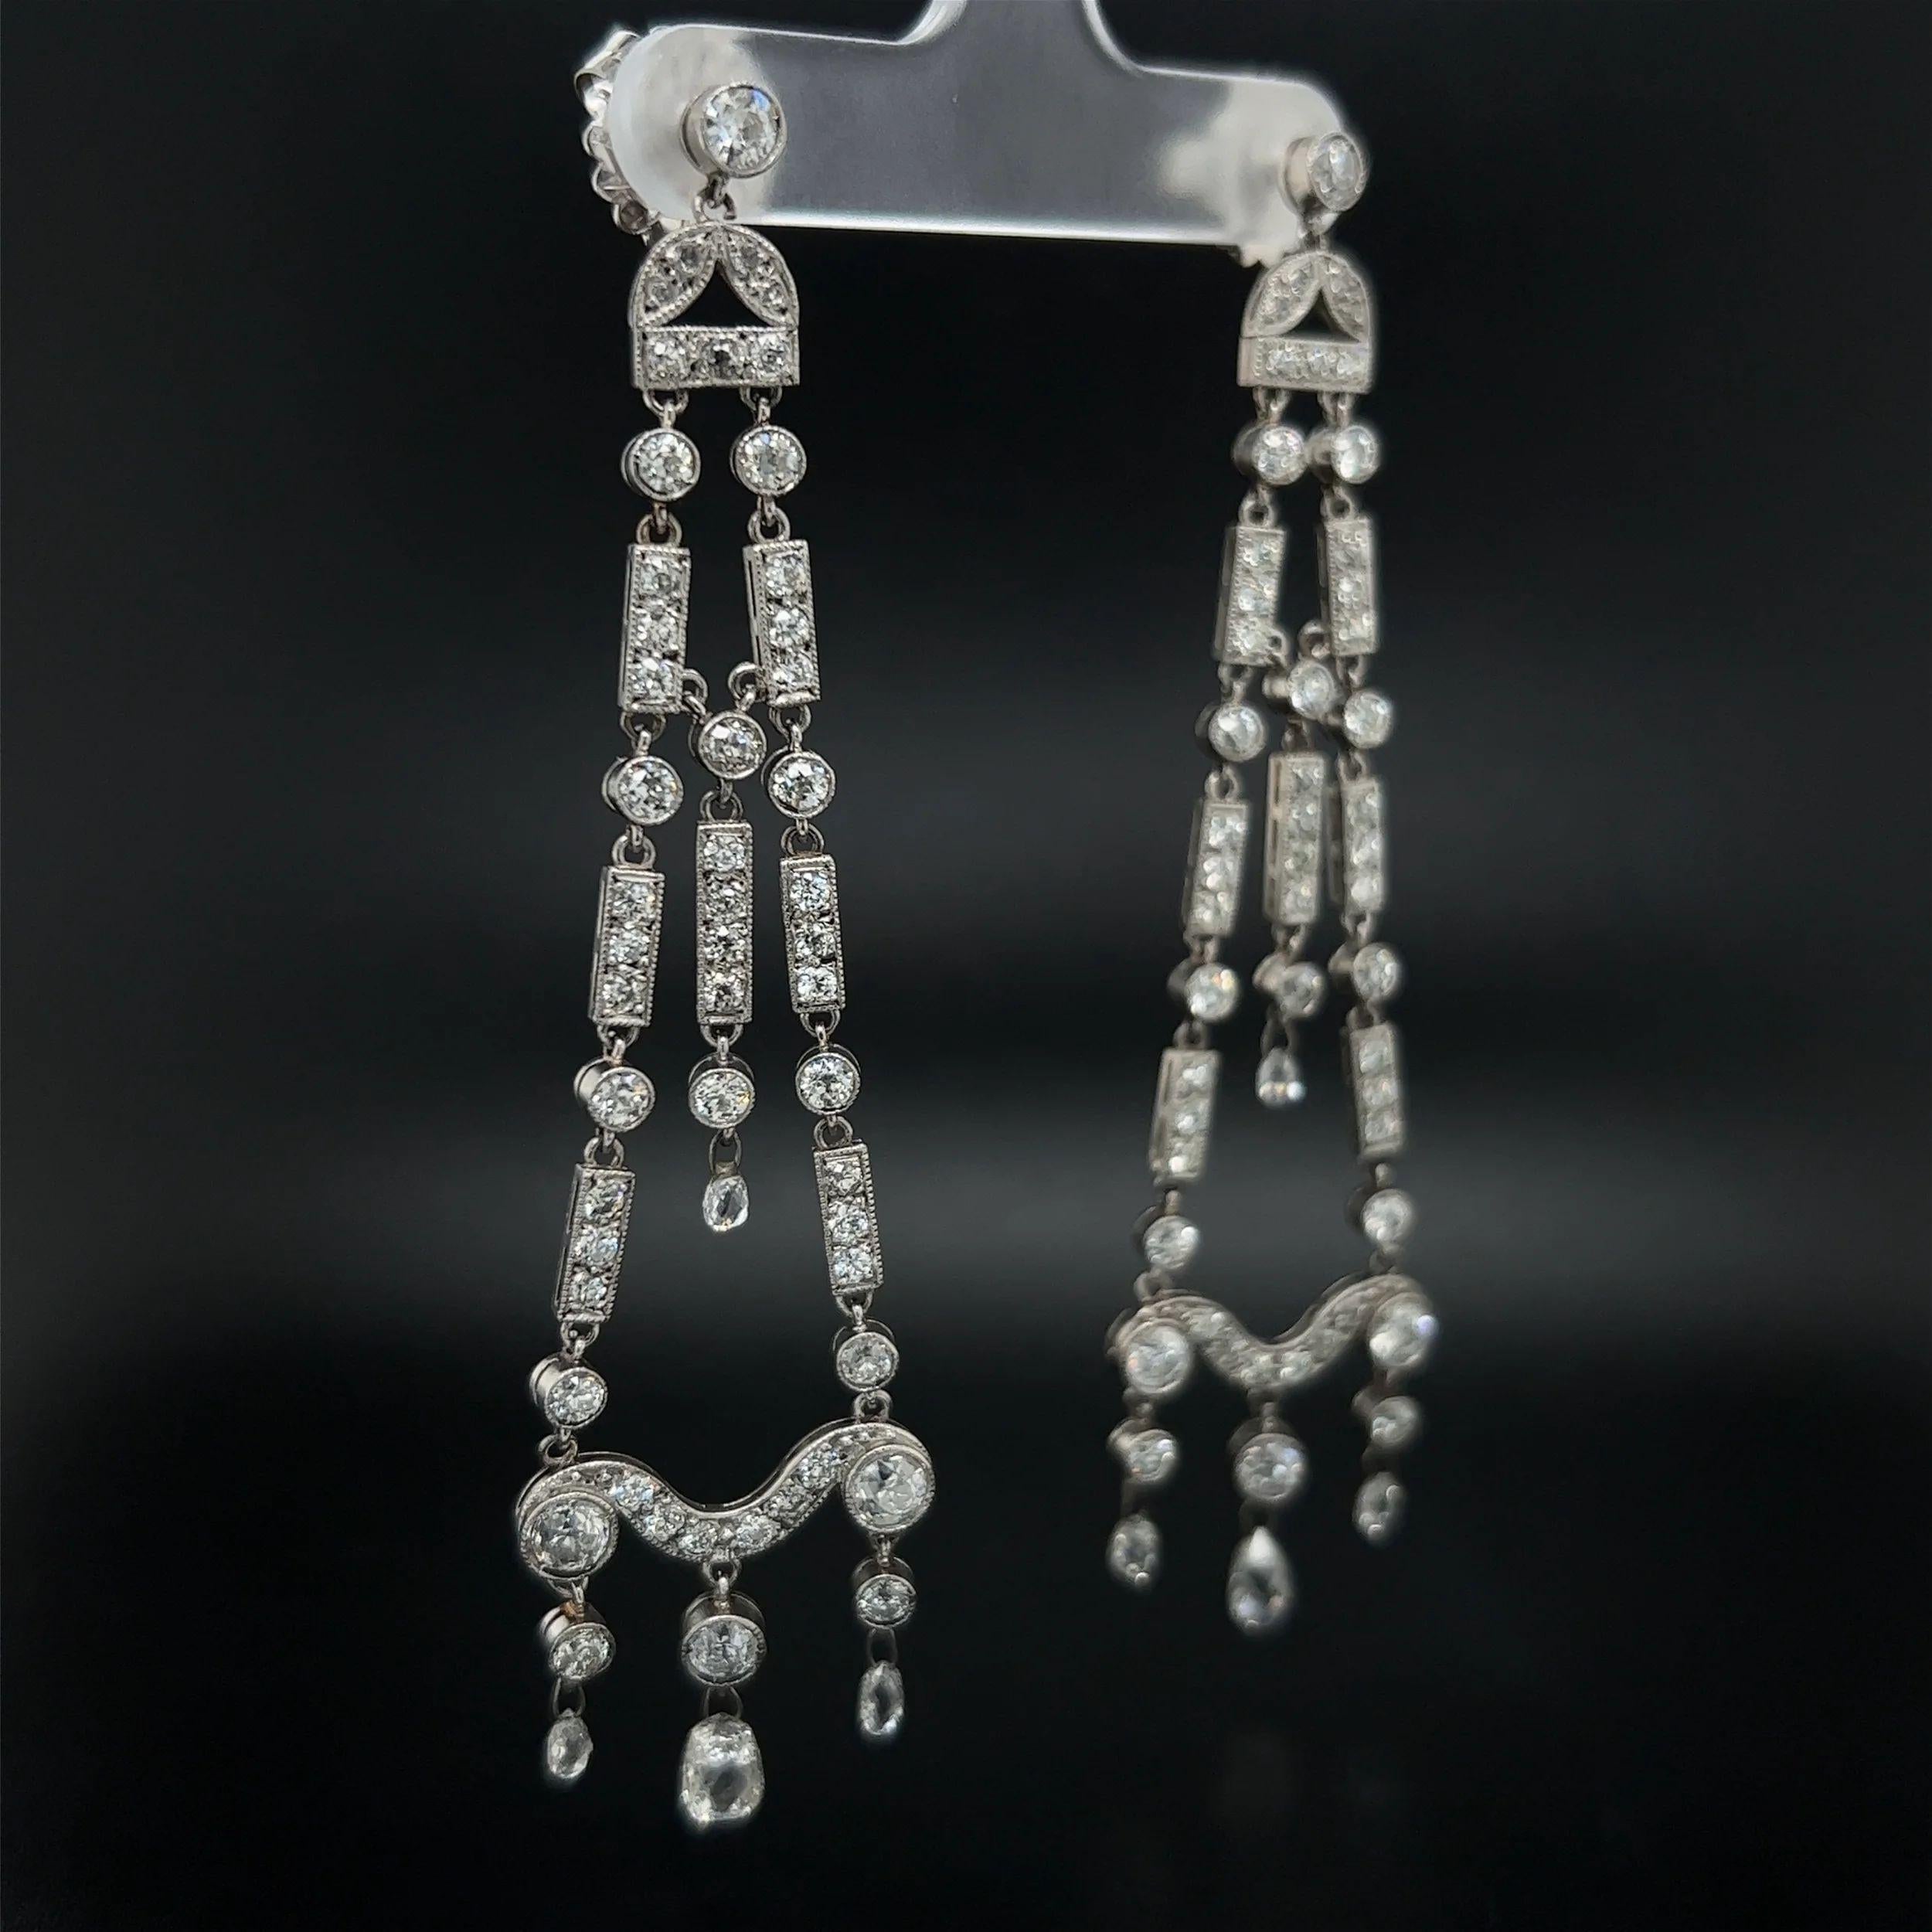 Simply Beautiful! Awesome Chandelier Diamond Platinum Drop Earrings. Hand set with 1.60tcw Briolette Diamonds and 5.08tcw Round Old European Cut Diamonds. Beautifully Hand crafted in Platinum. Earrings measure approx. 3” long x 0.76” wide. More